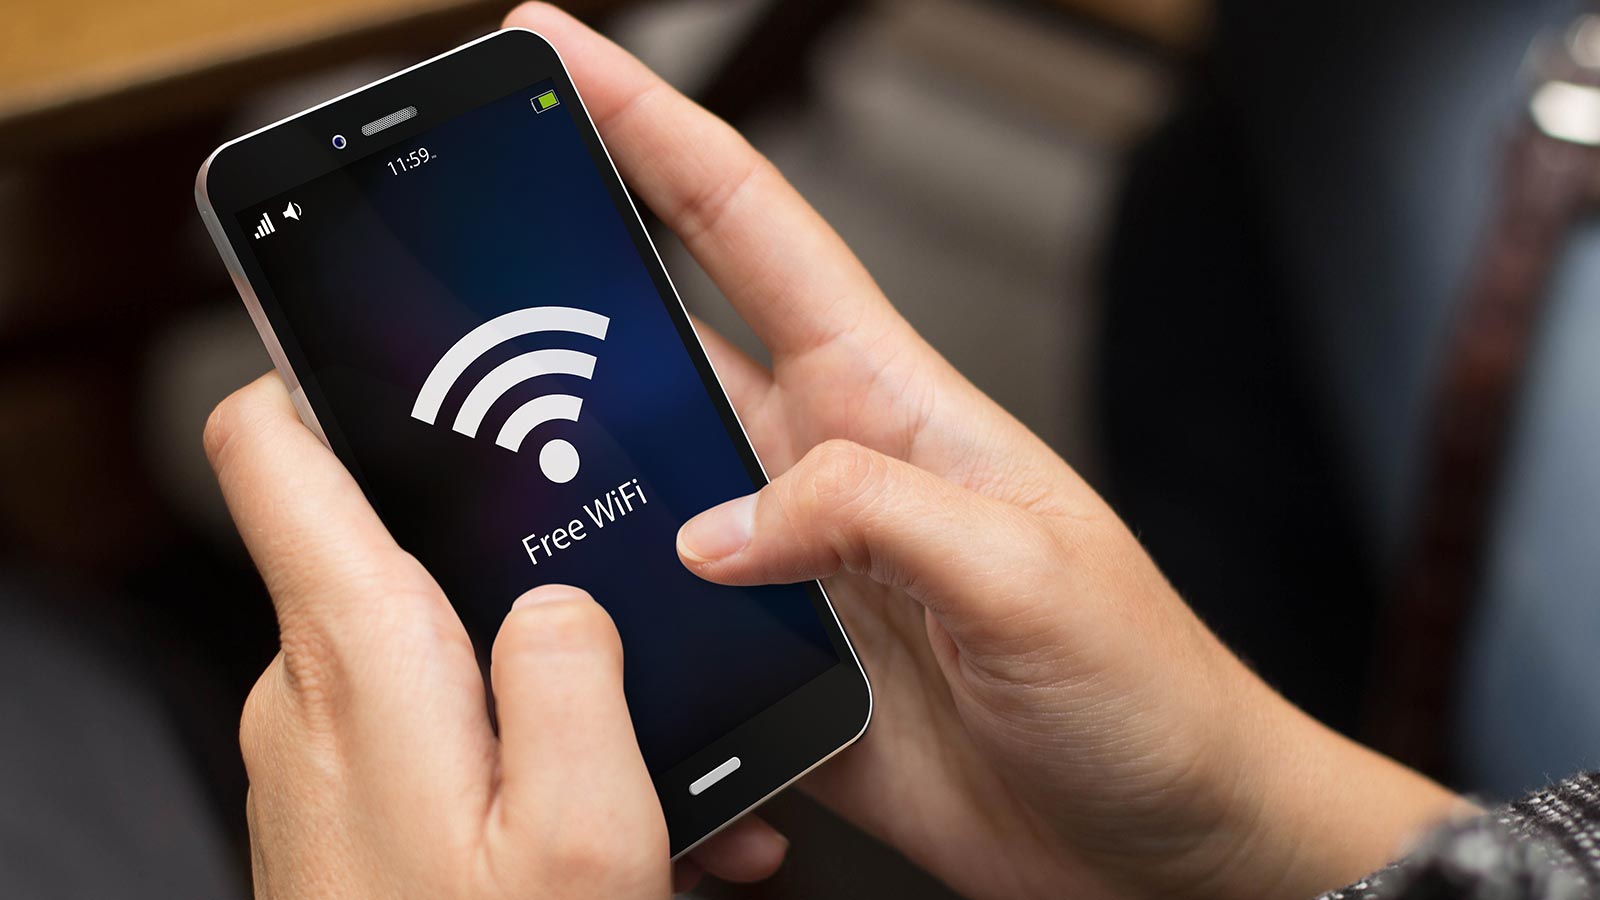 Avoid using public Wi-Fi for transactions